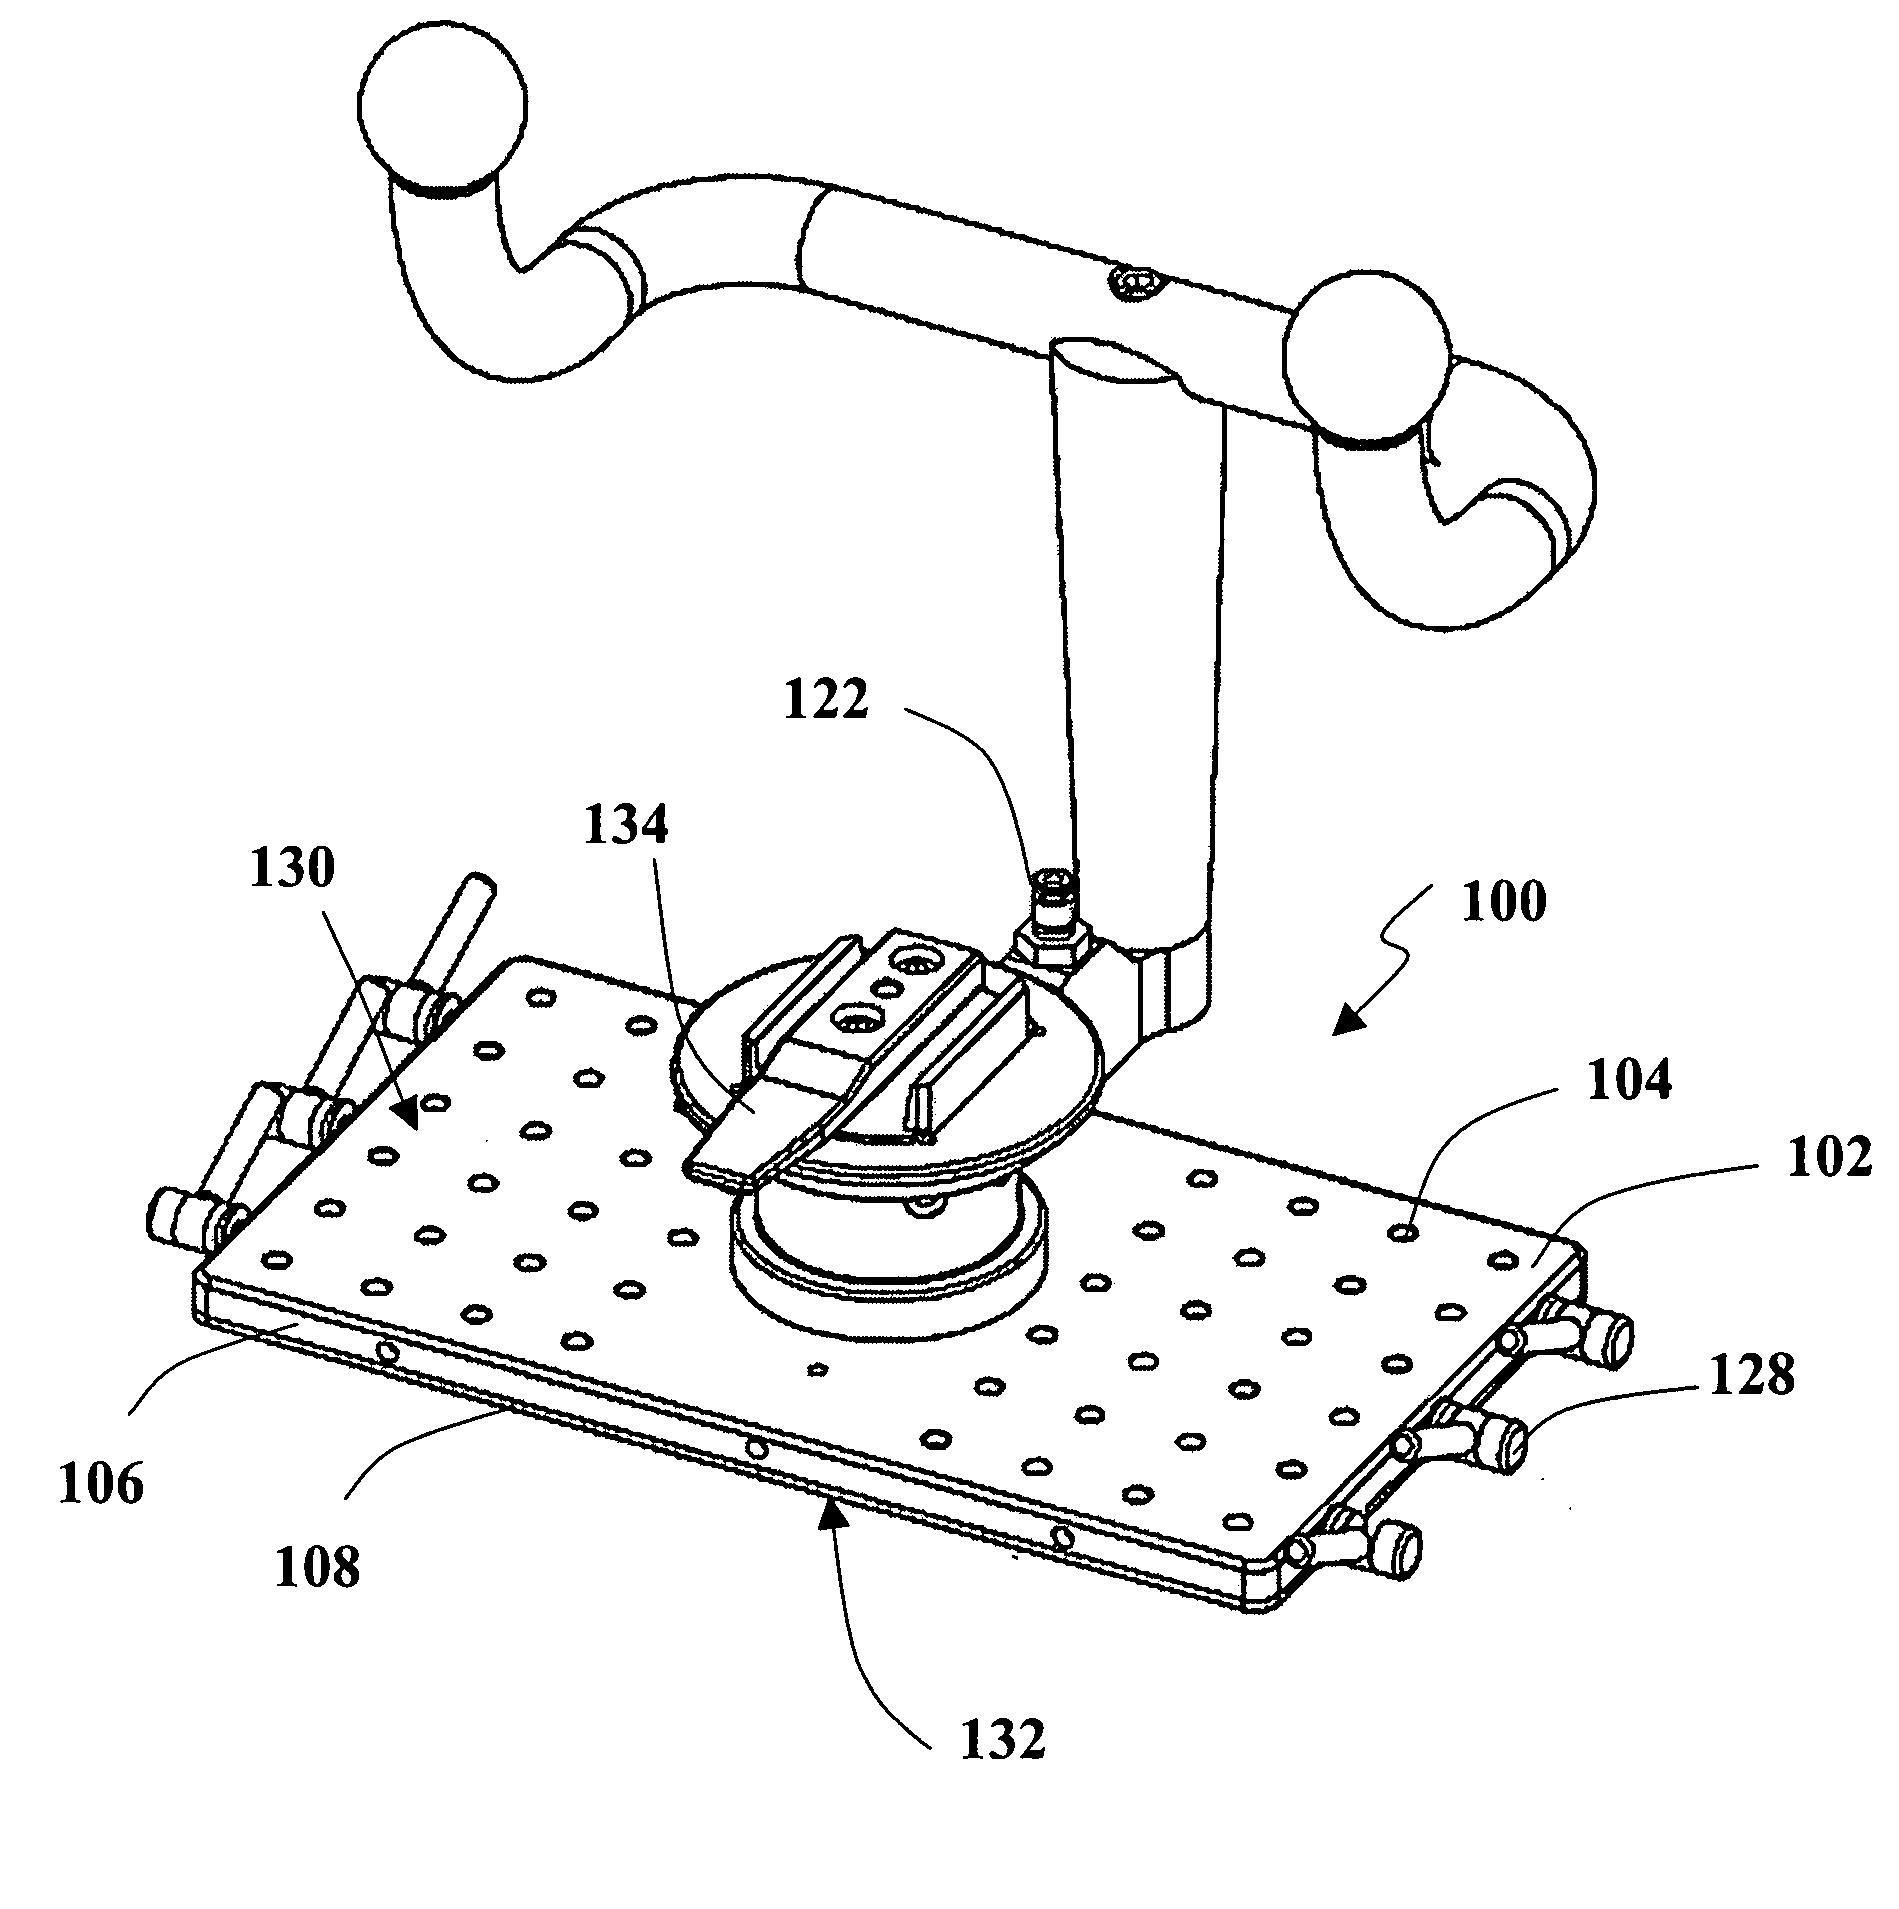 Polishing fixture for simultaneous loading of a plurality of optical connectors and fiber stubs and a method of loading